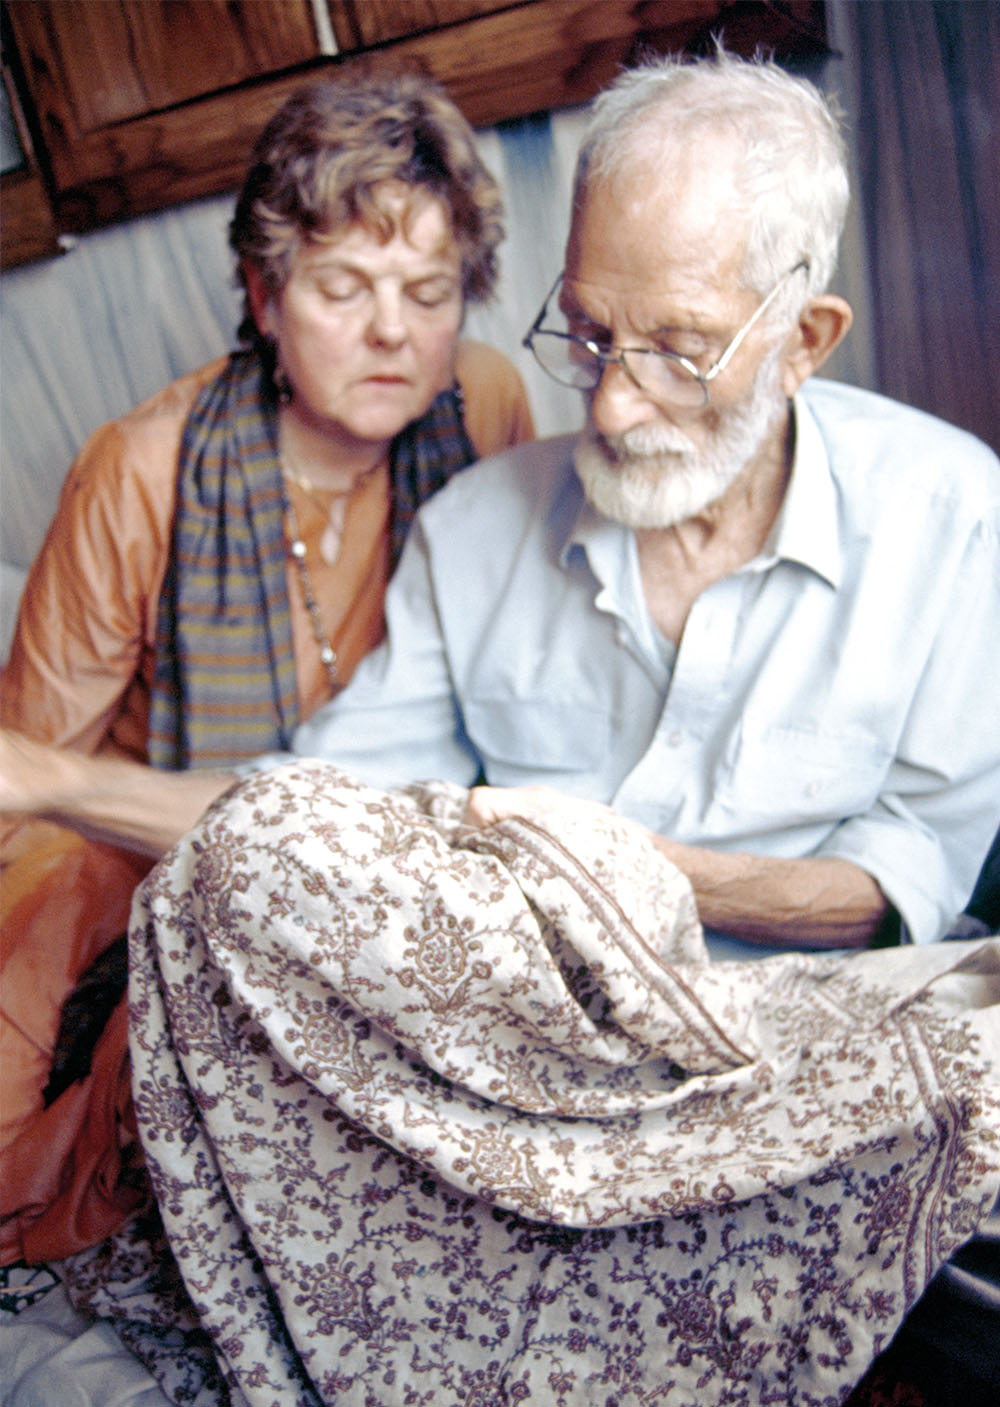 Jenny and one of her greatest inspirations when she had just started working with craftpersons in Kashmir Valley—Phalguru, the renowned sozni embroiderer